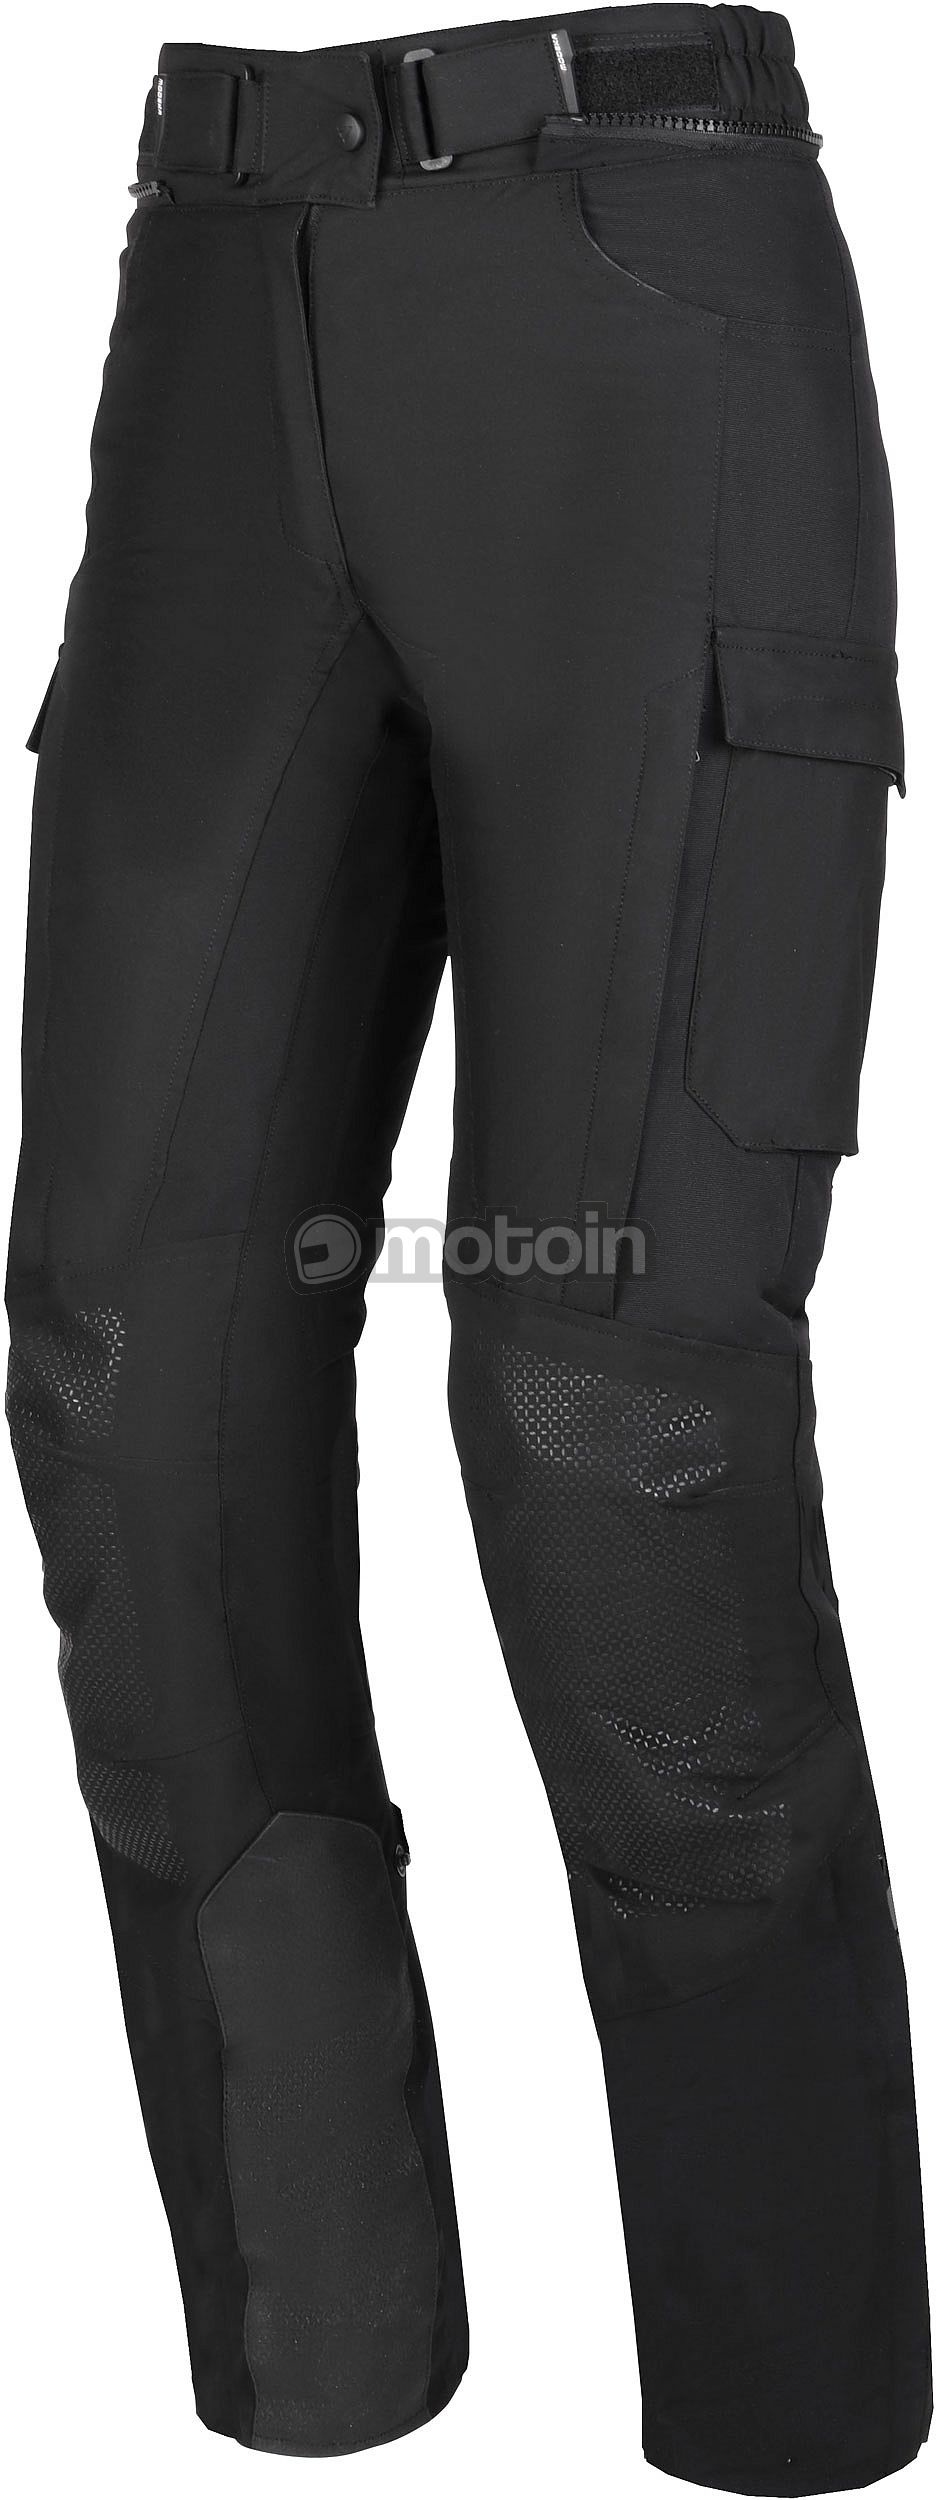 Modeka Hydron, pantalones textiles impermeables mujer